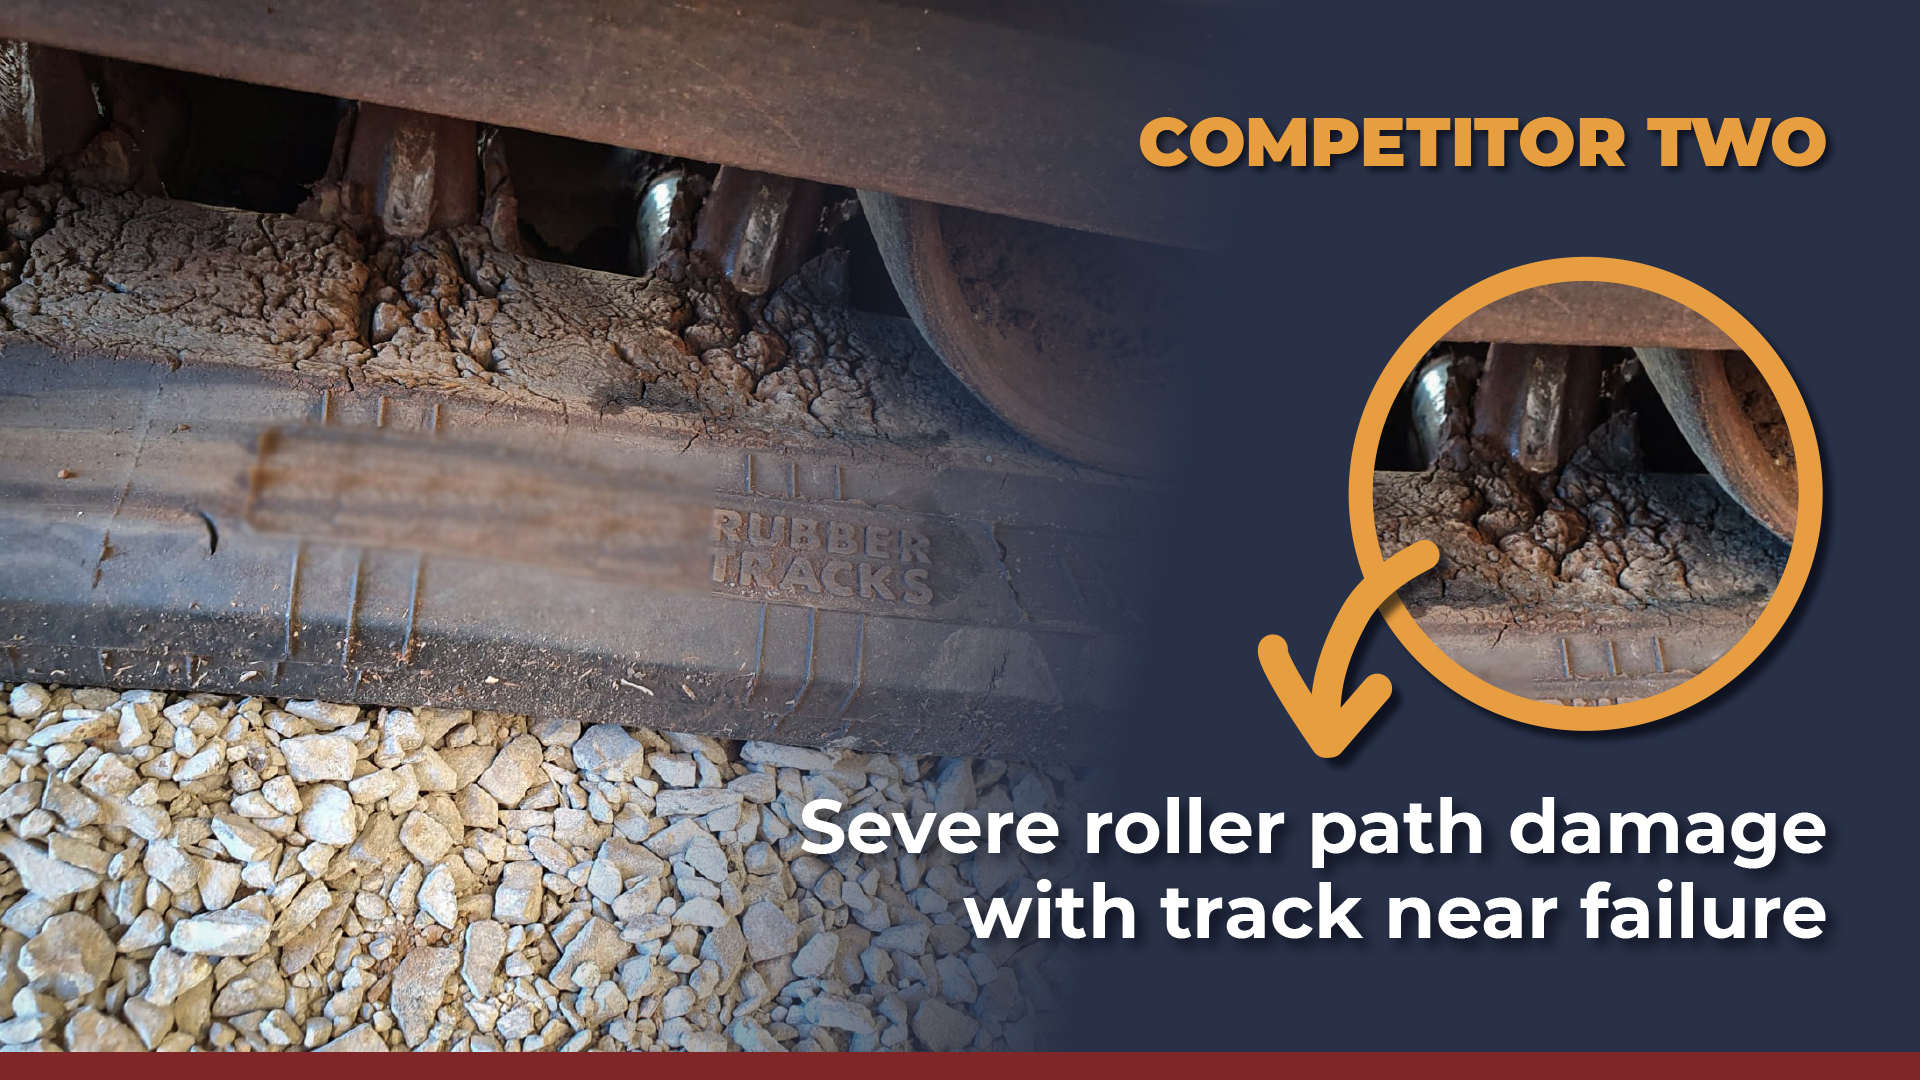 Cheap rubber tracks - Competitor Two: Severe roller path damage with track near failure (note brand has been blurred)